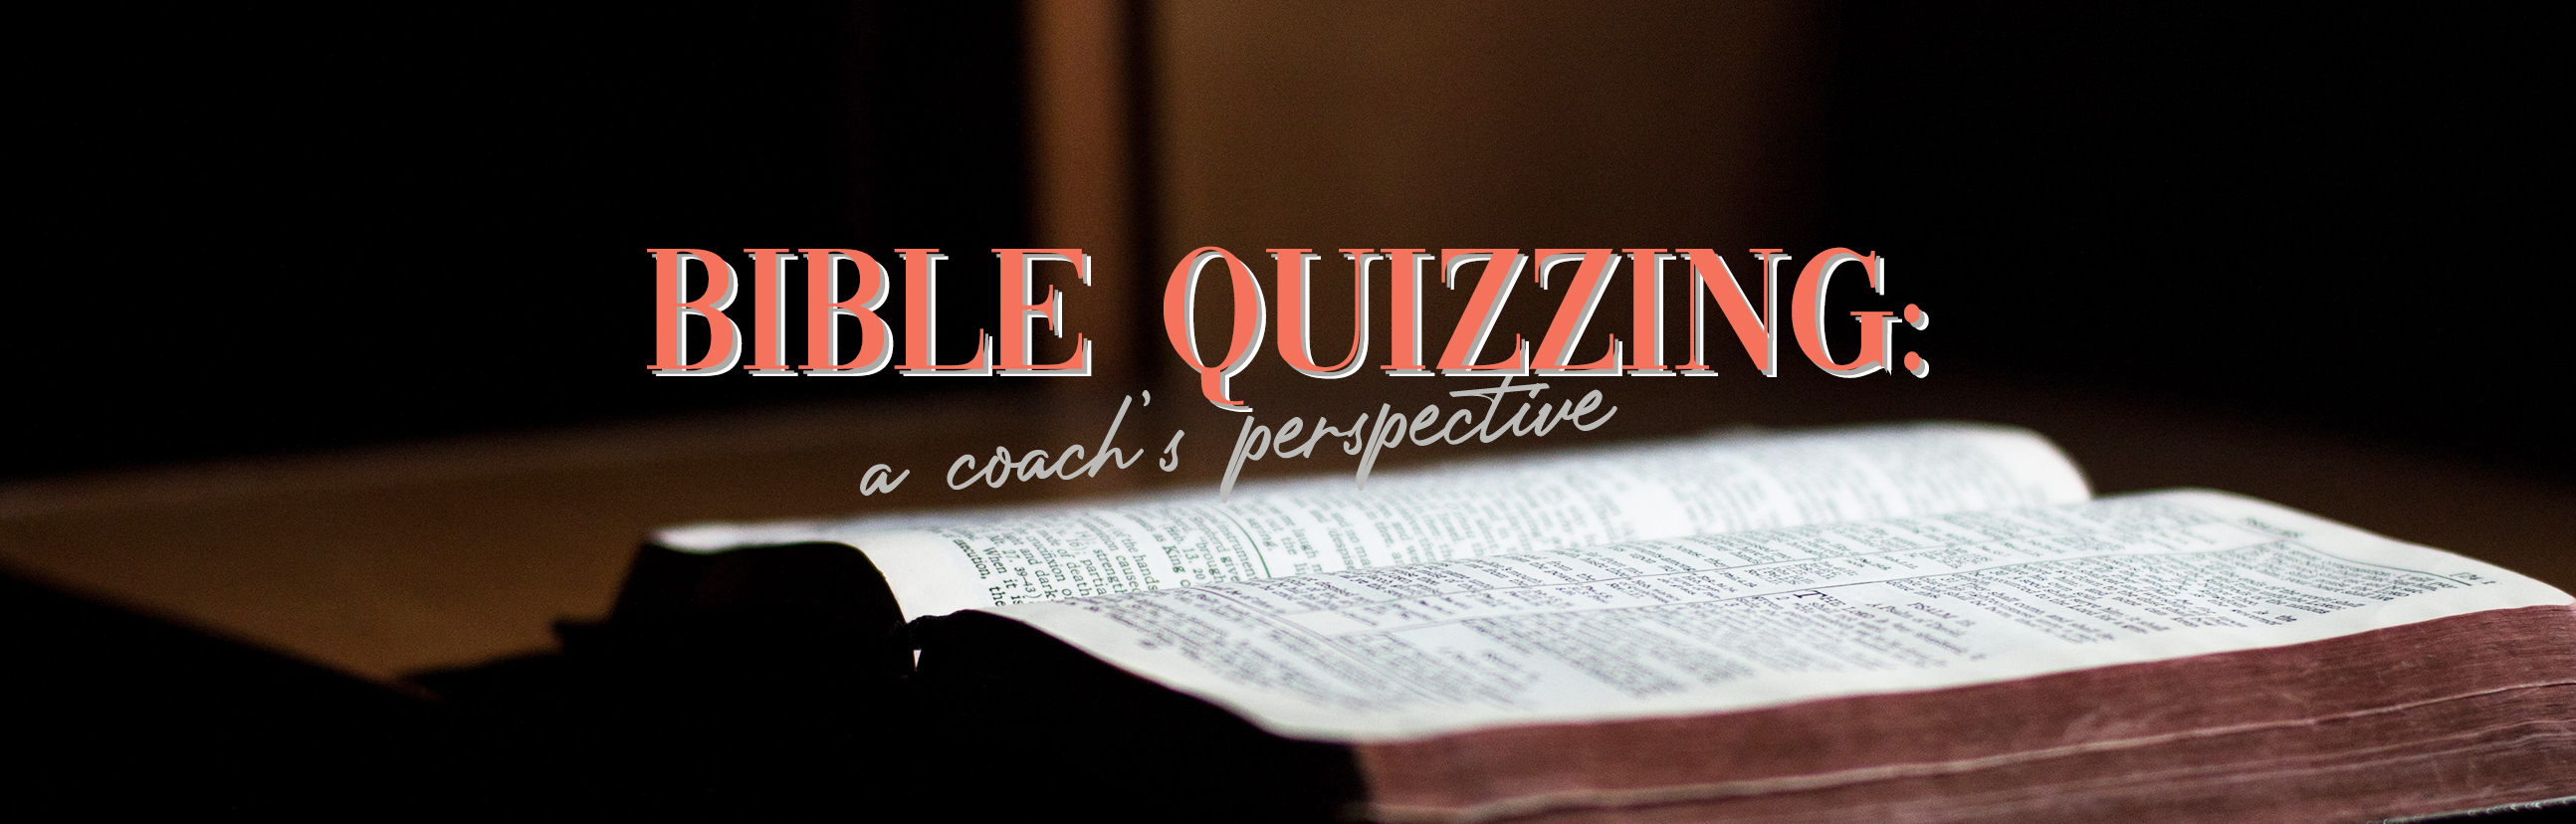 Bible Quizzing: A Coach’s Perspective